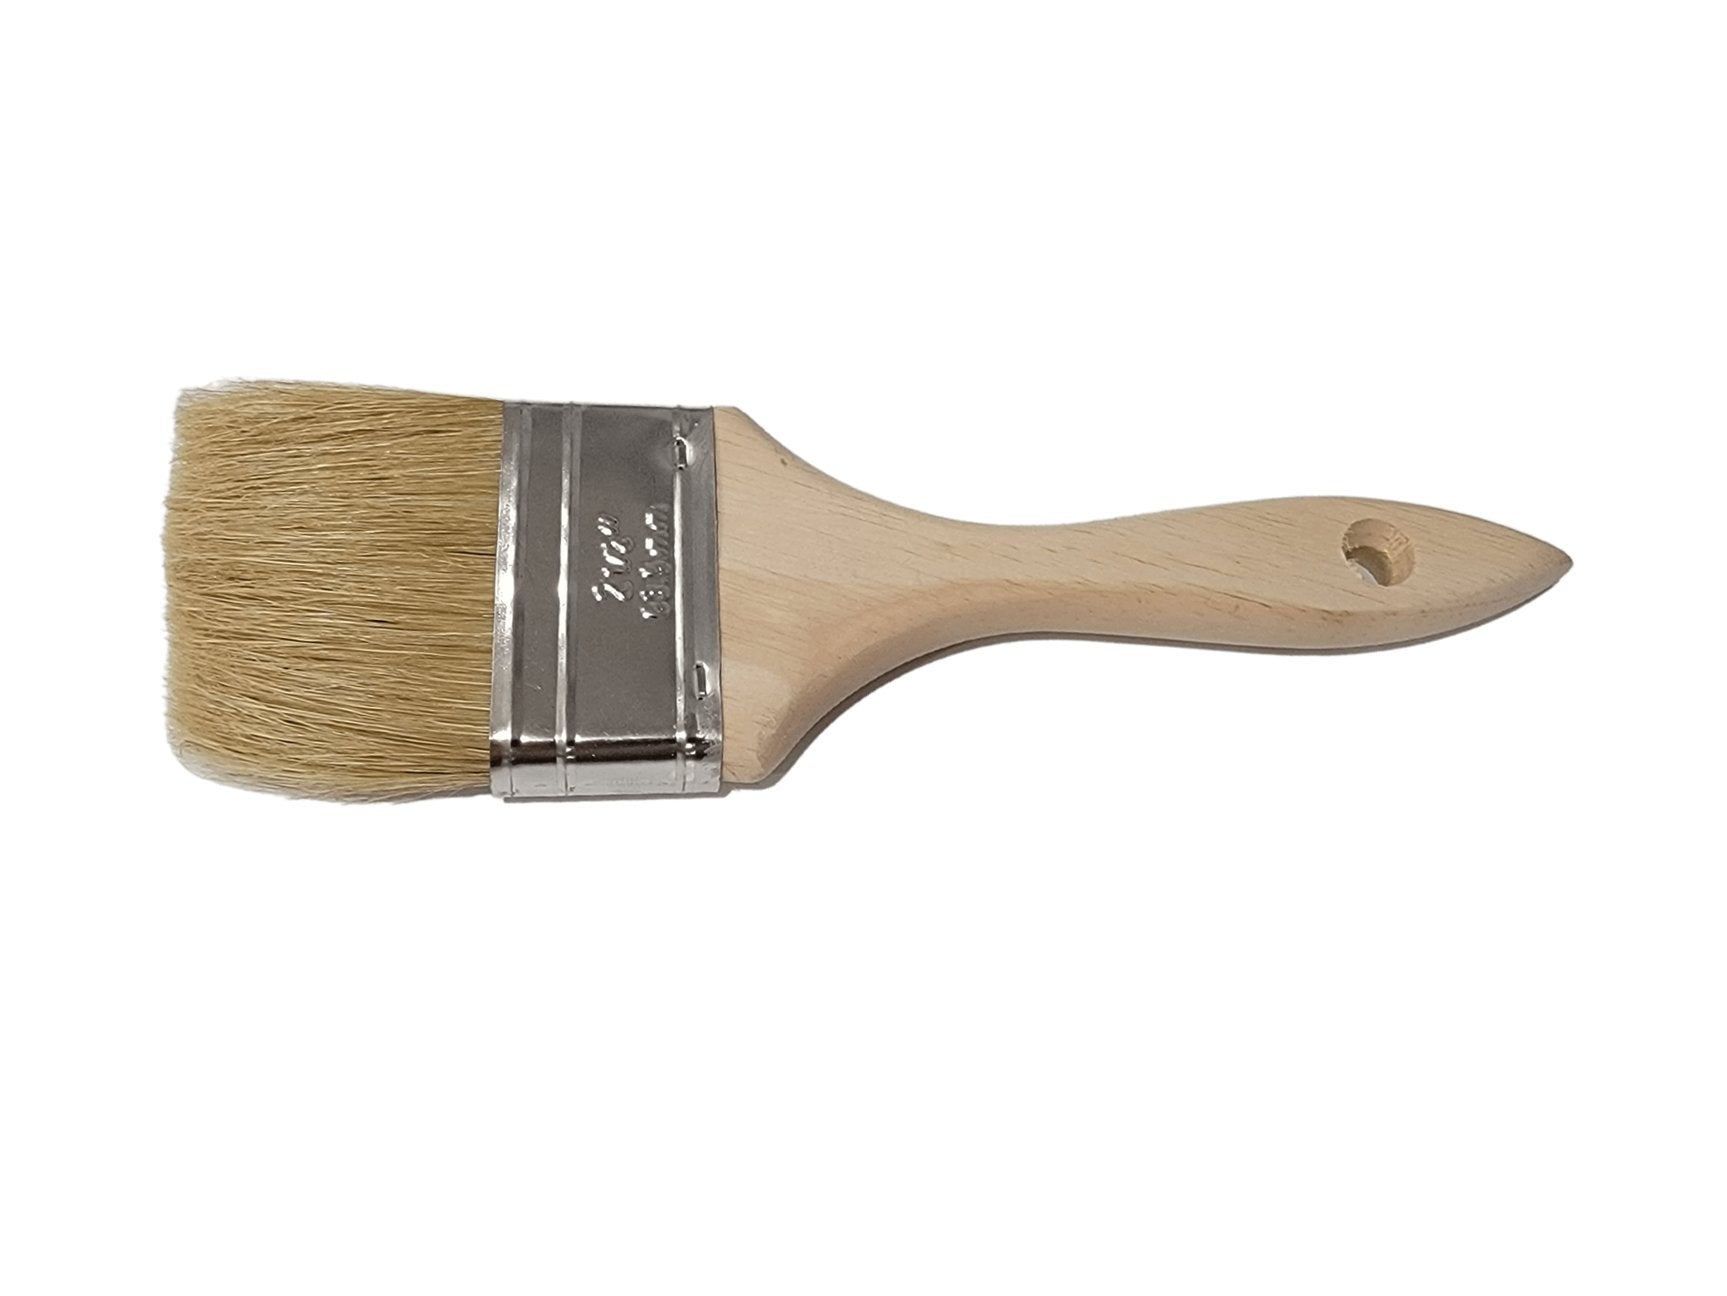 2 1/2 Premium Chip Brush - Natural Bristle – All Paint Products